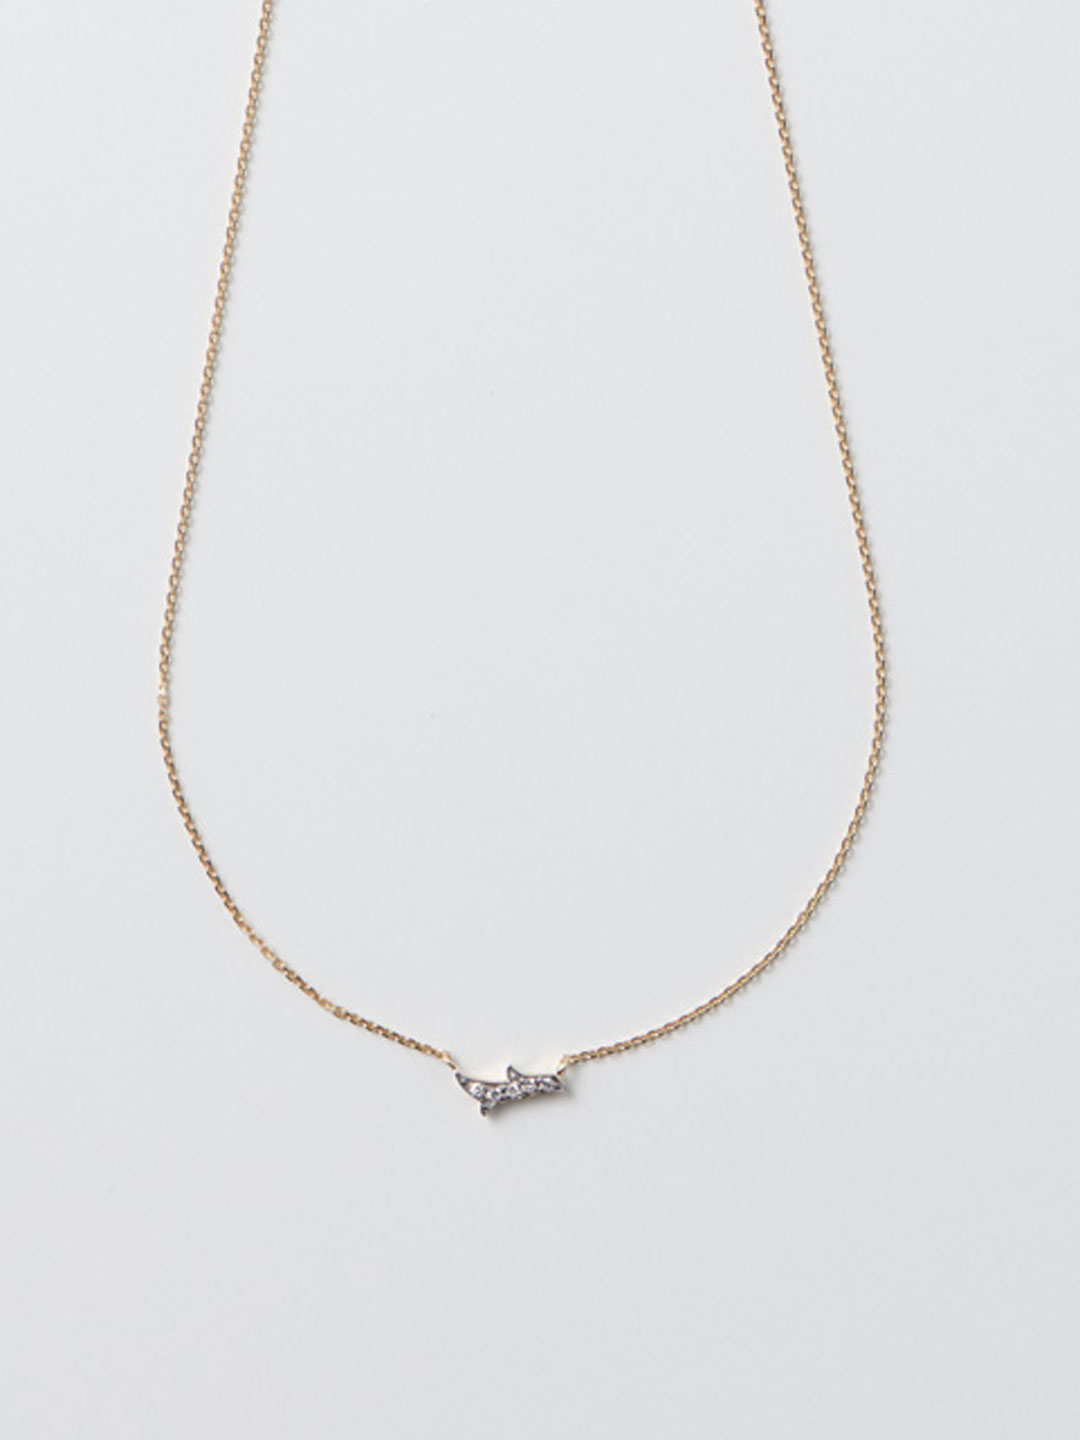 New Beginning Necklace - Yellow Gold